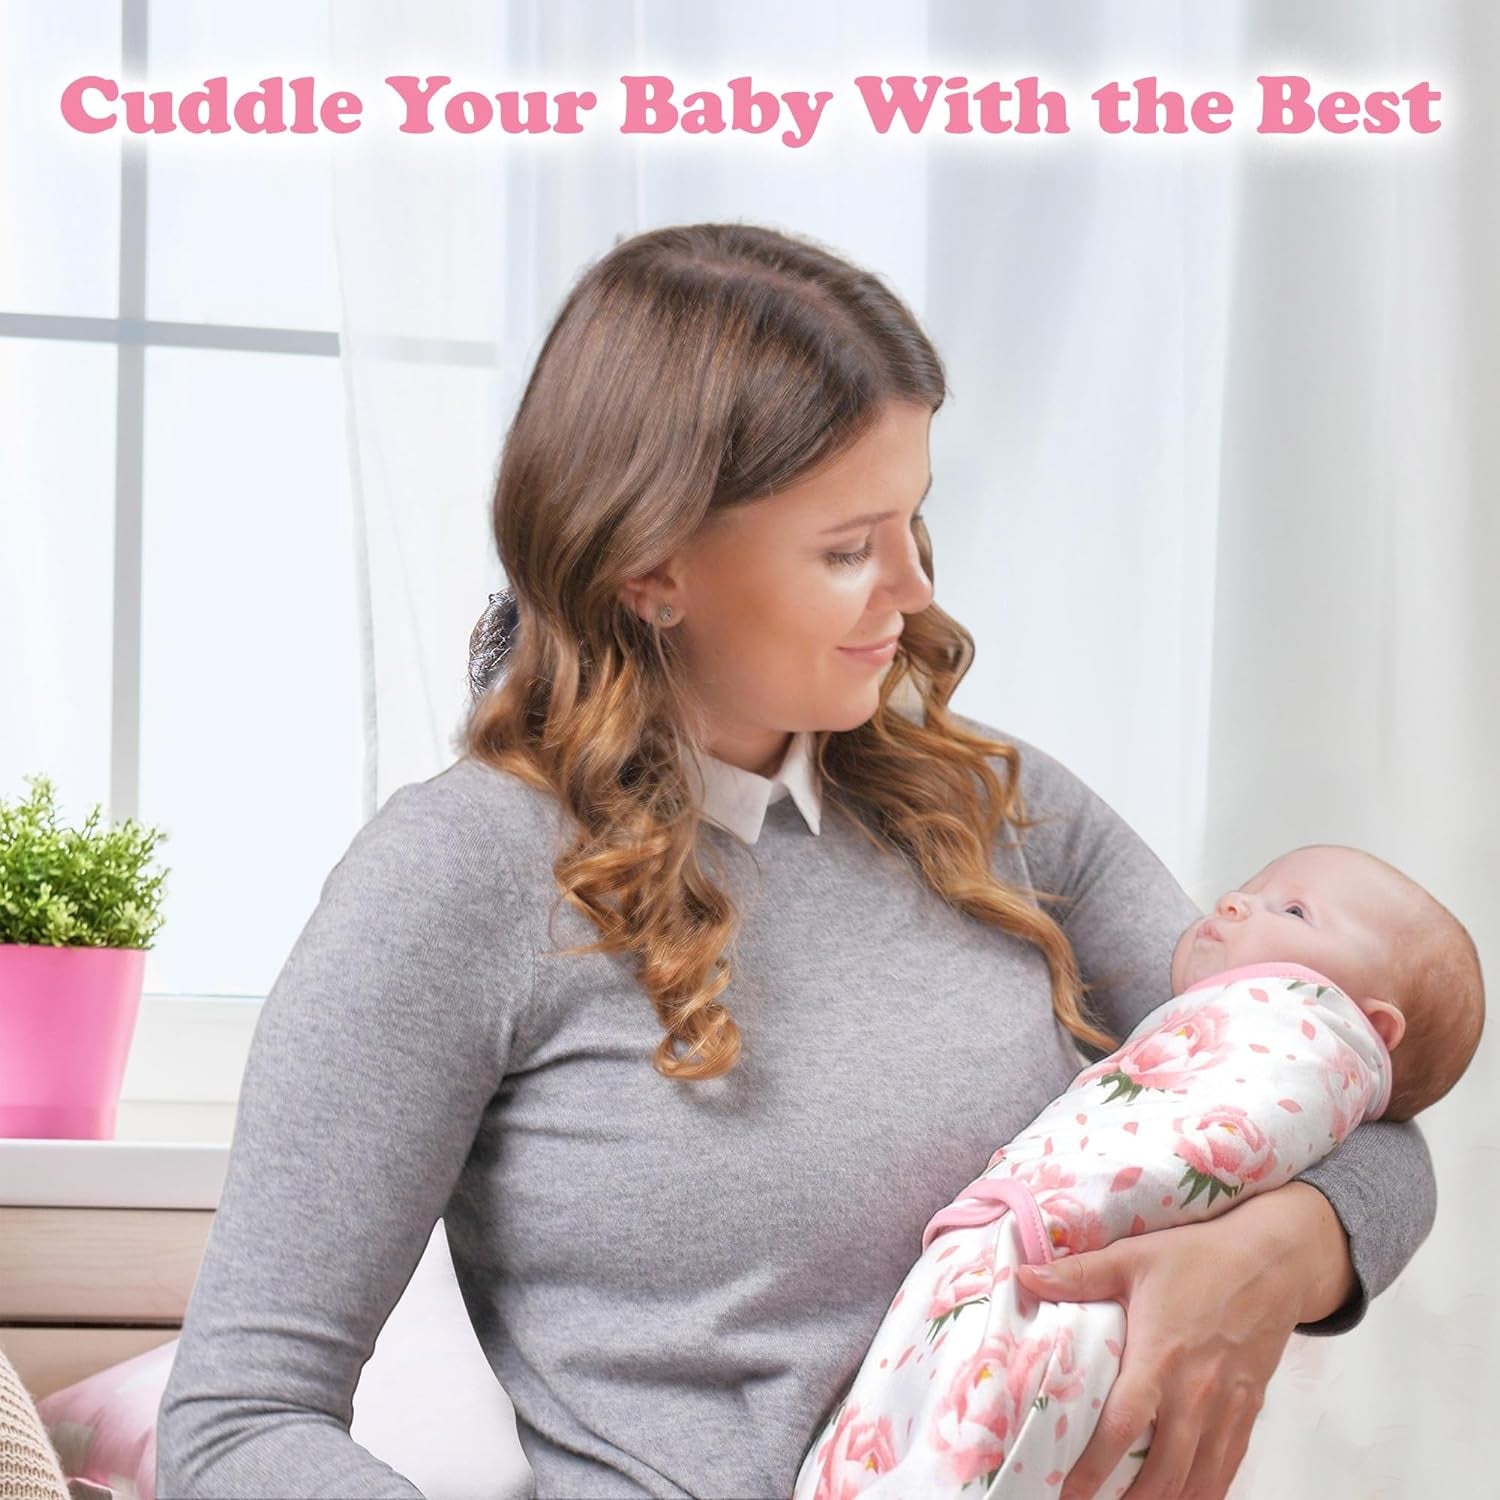 "Cozy and Stylish Baby Swaddle Blanket Wrap Set - Perfect for Newborns and Infants, 3-Pack with Adorable Pink Floral Design"